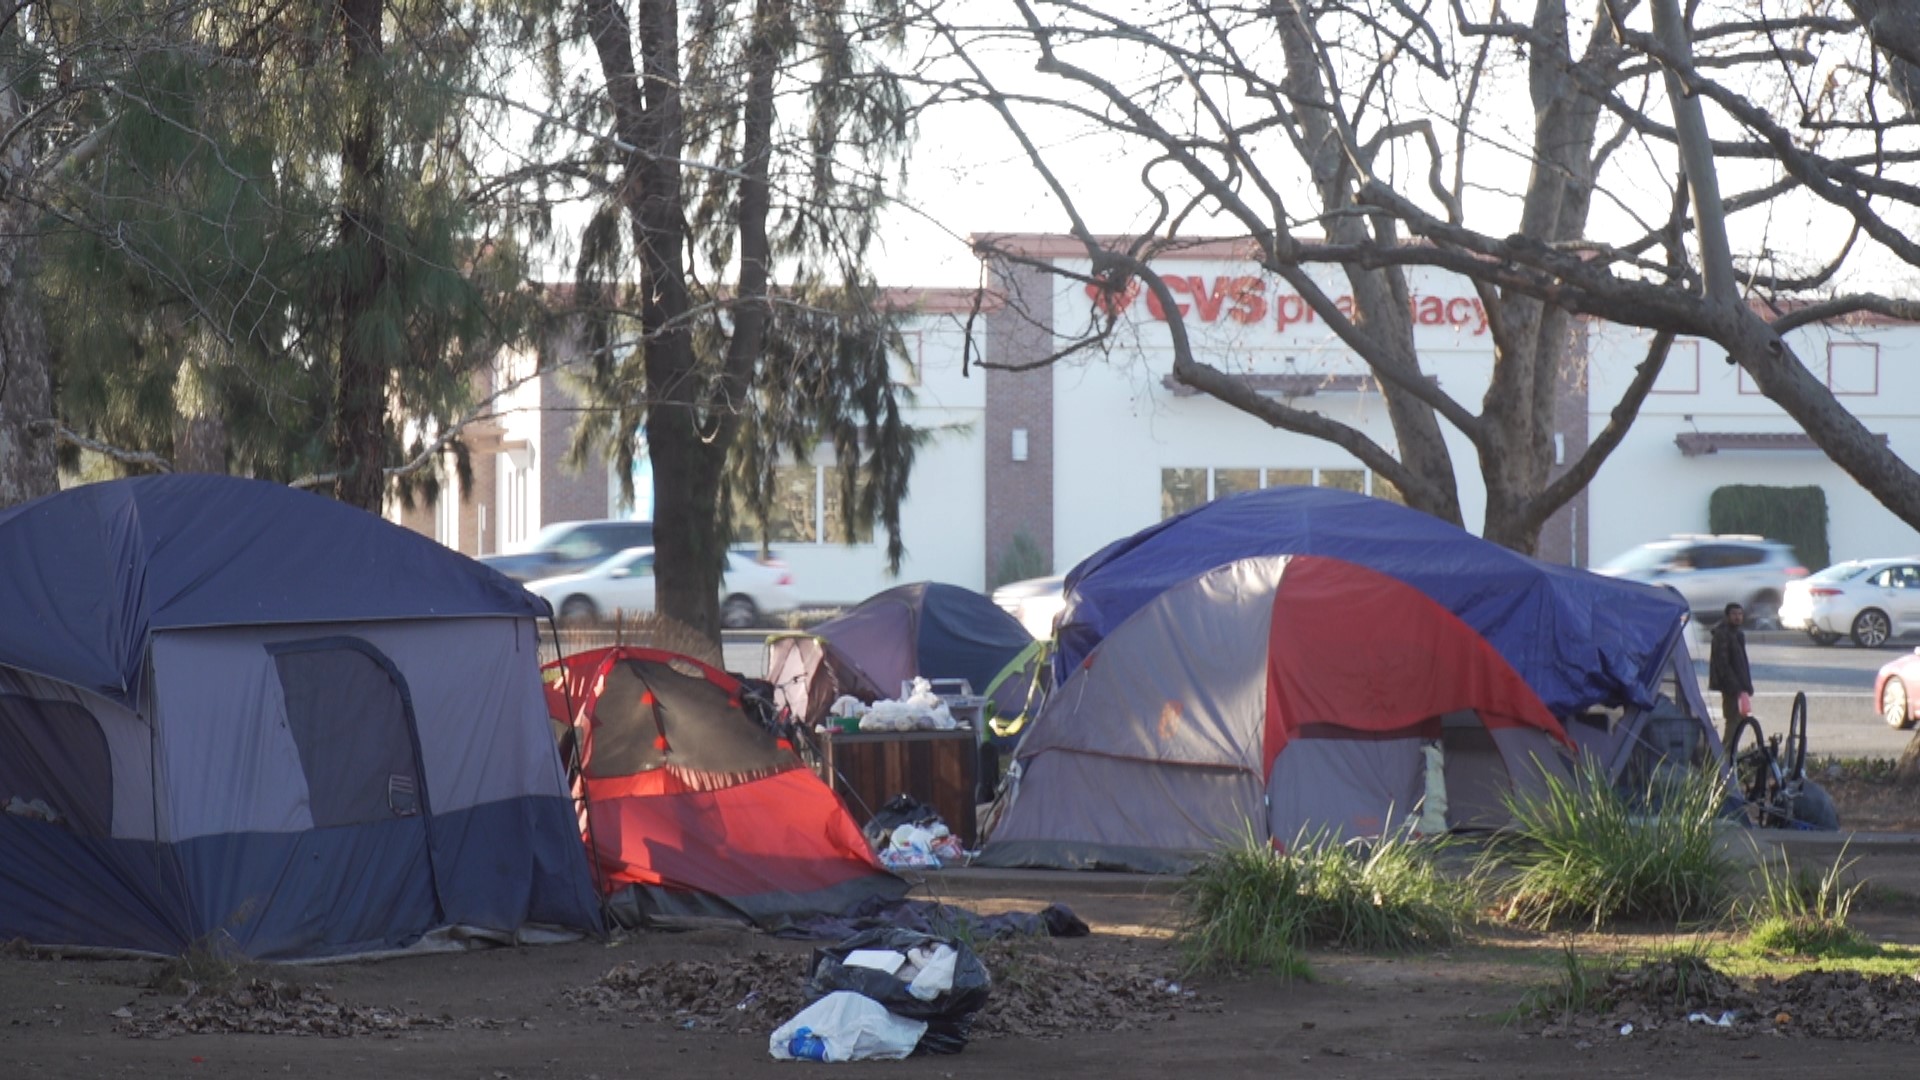 The District Attorney's office says it has not initiated legal action, but rumblings of a lawsuit has unhoused advocates alarmed.